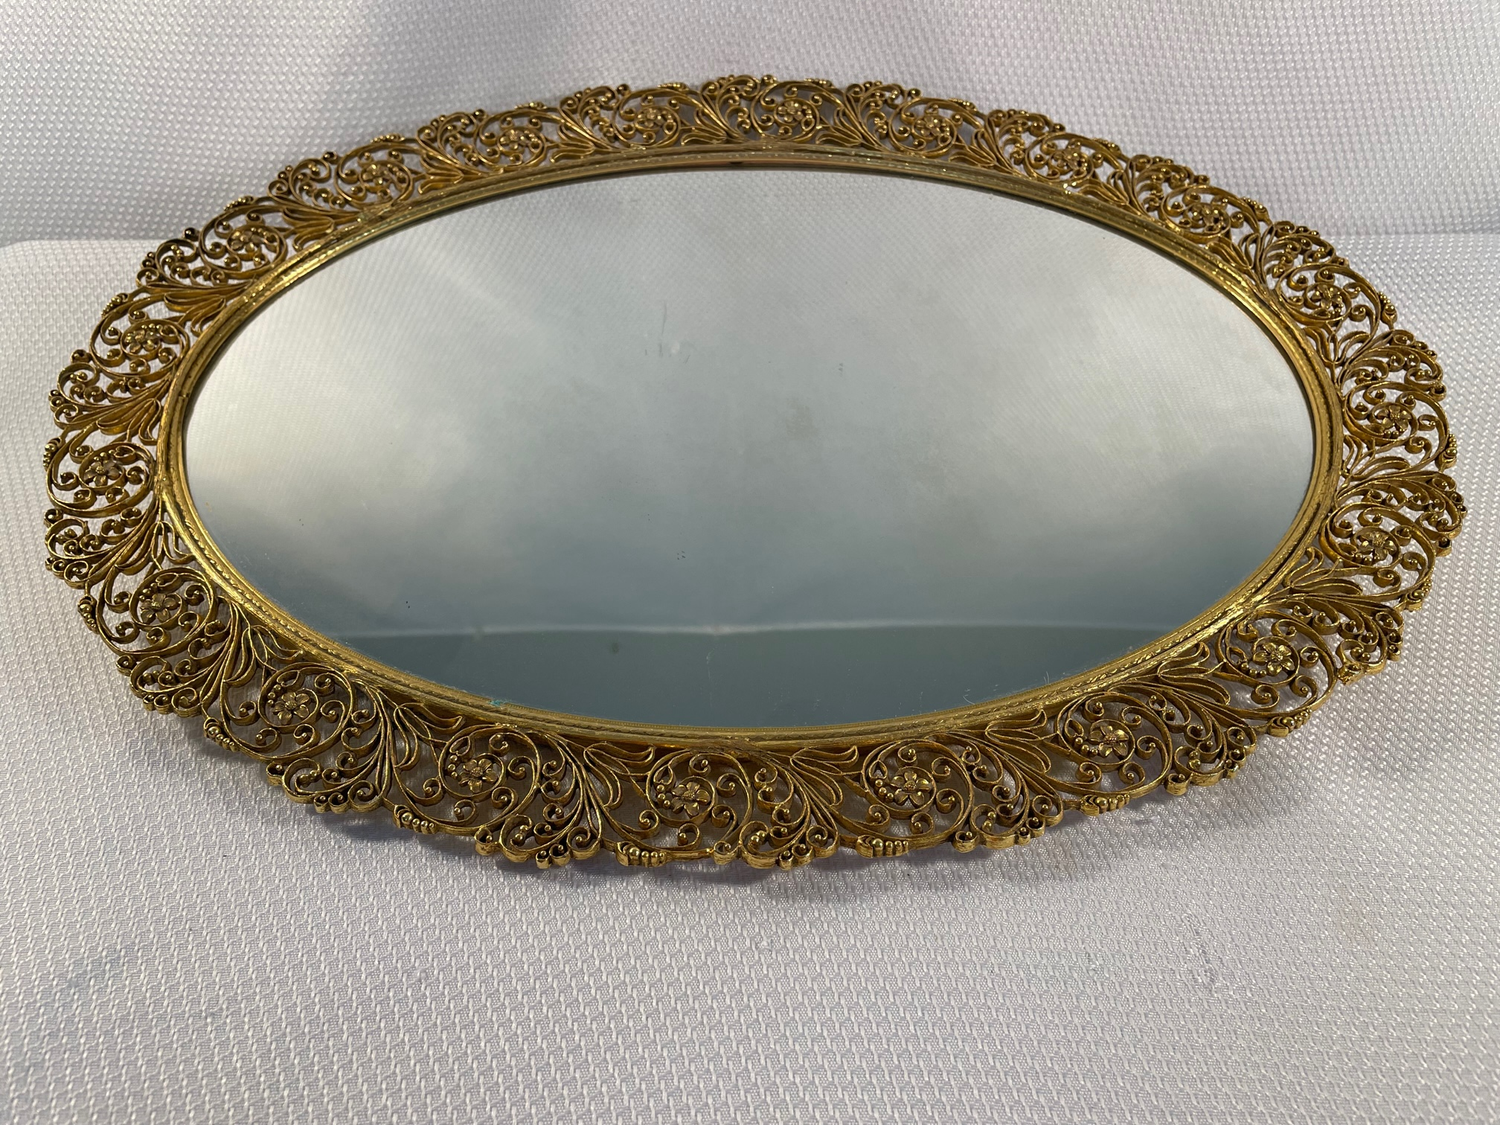 Large Oval Wooden Vintage chrysanthemum Vanity Tray, 14inches x 6 inch –  Noah's Garden Creation